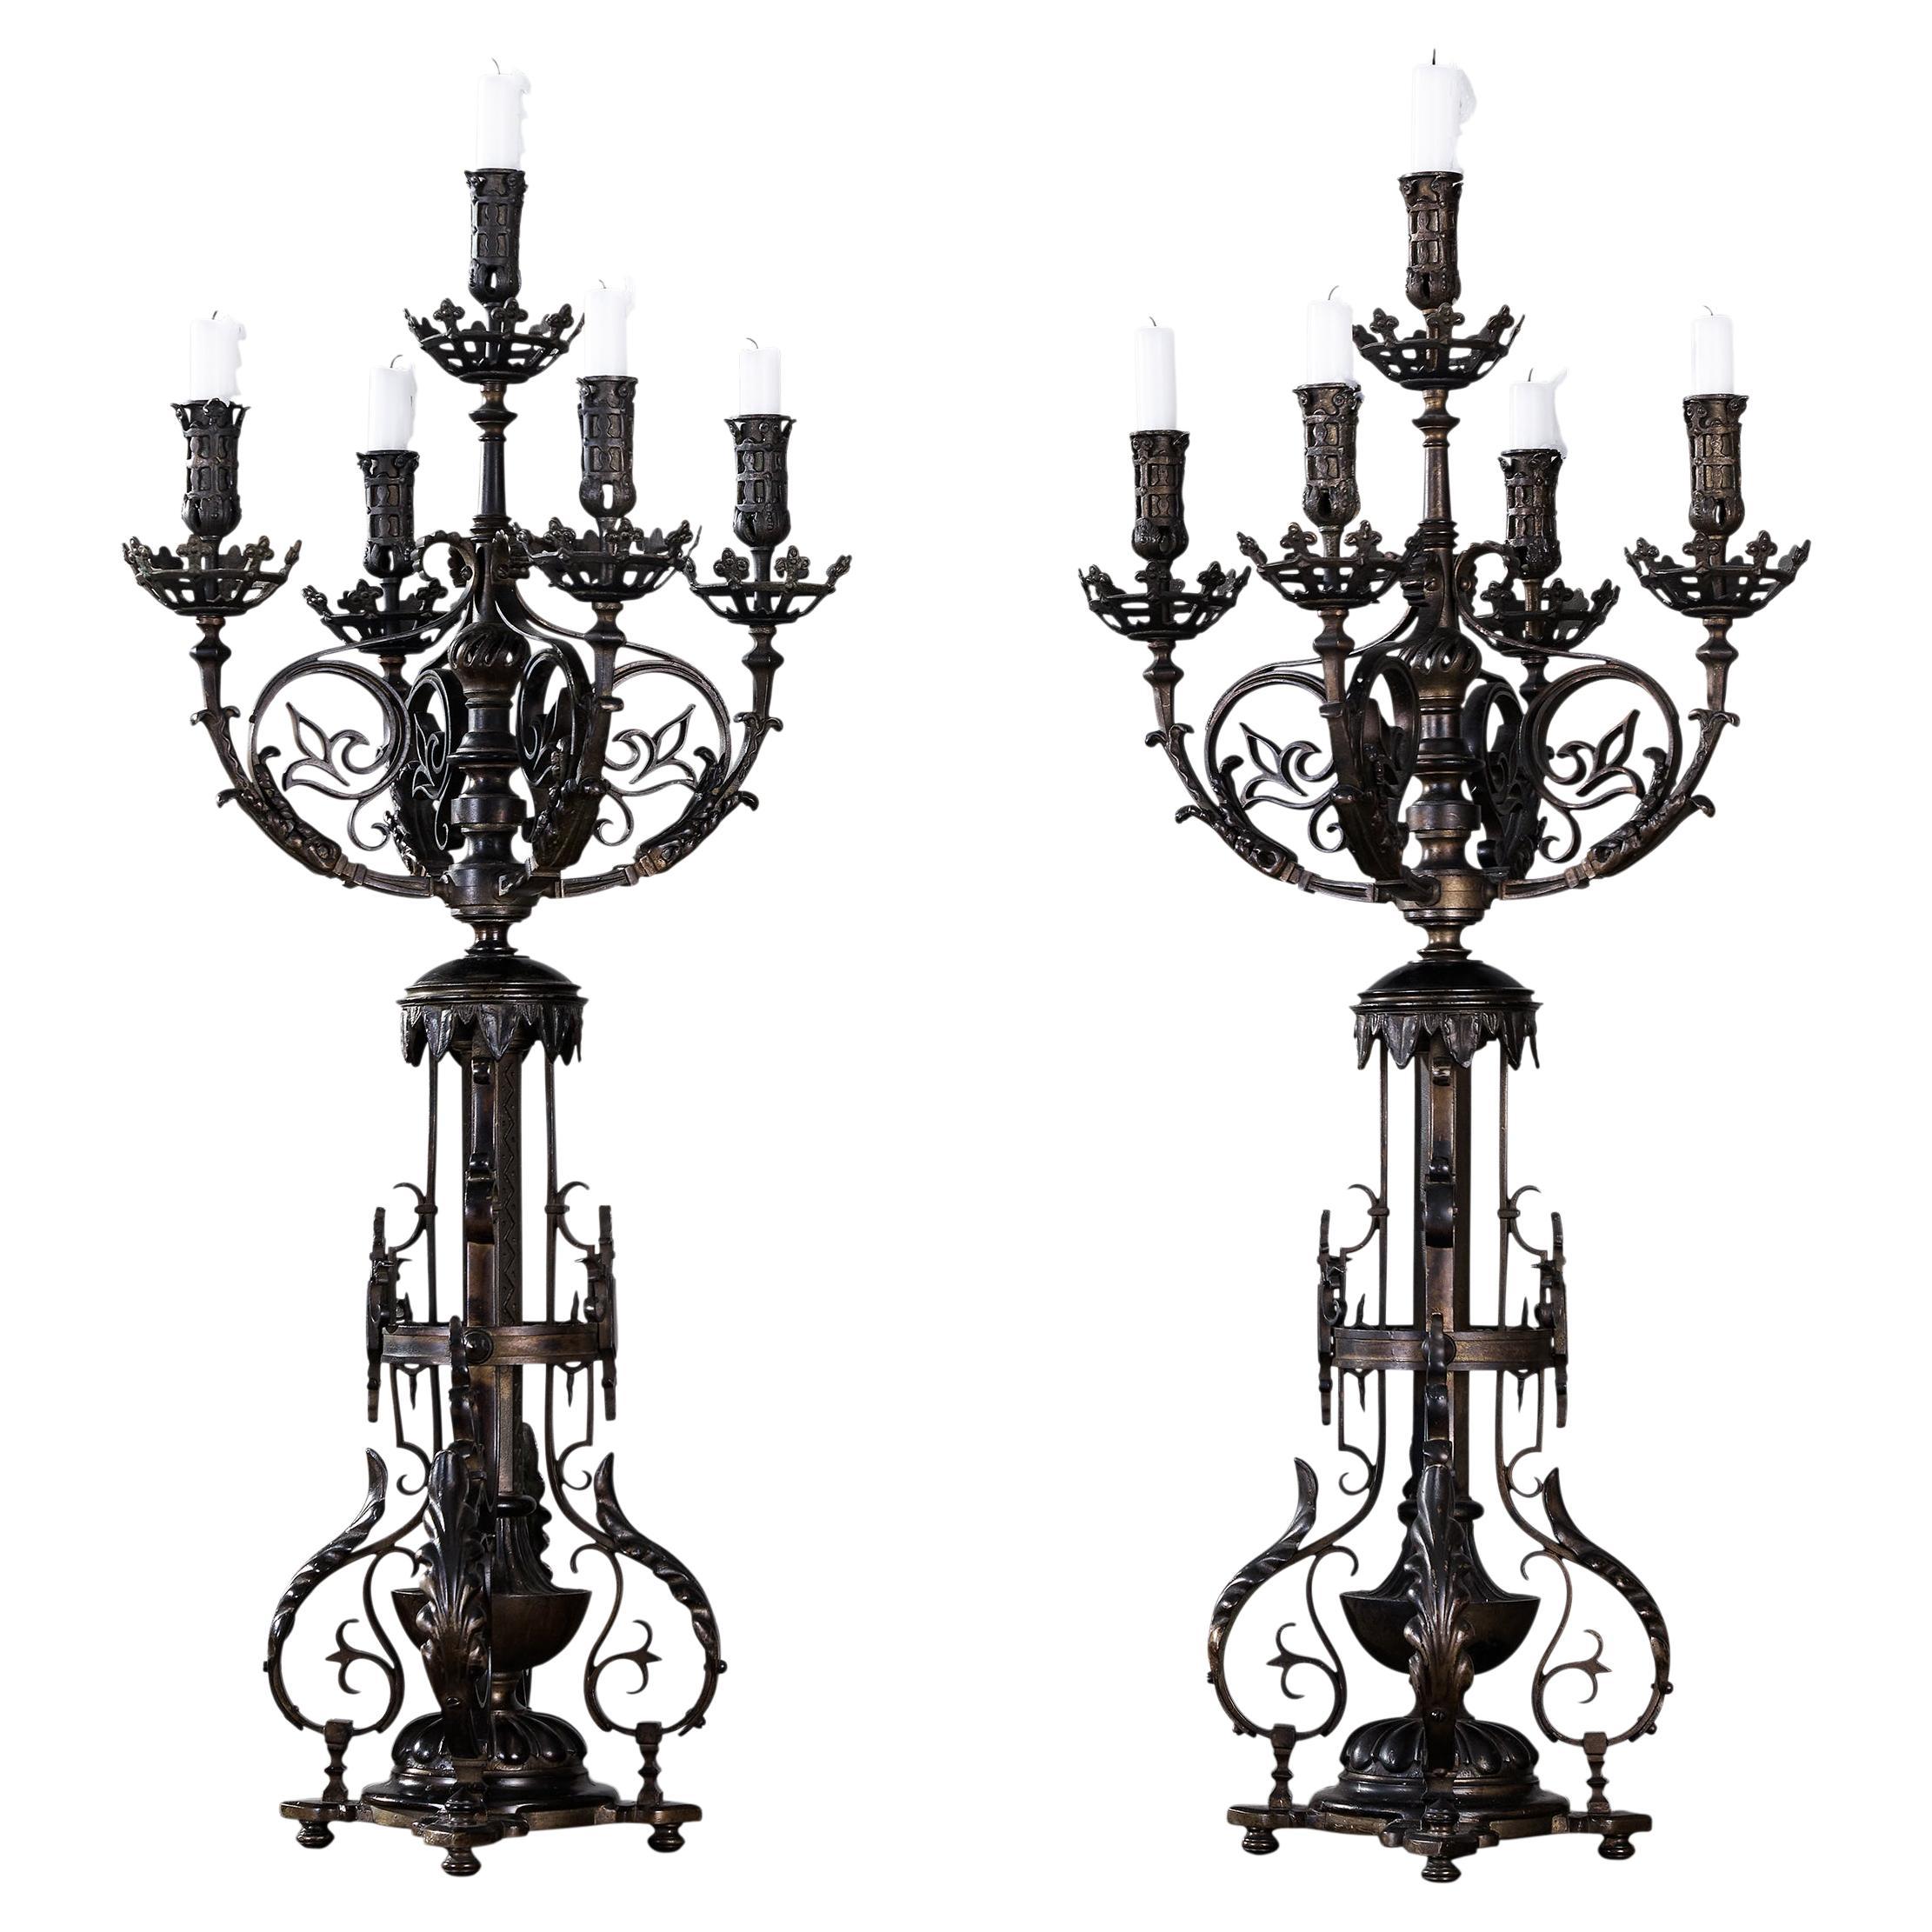 A Fine Pair Of Bronze And Partly Iron Five-Light Candelabras  For Sale